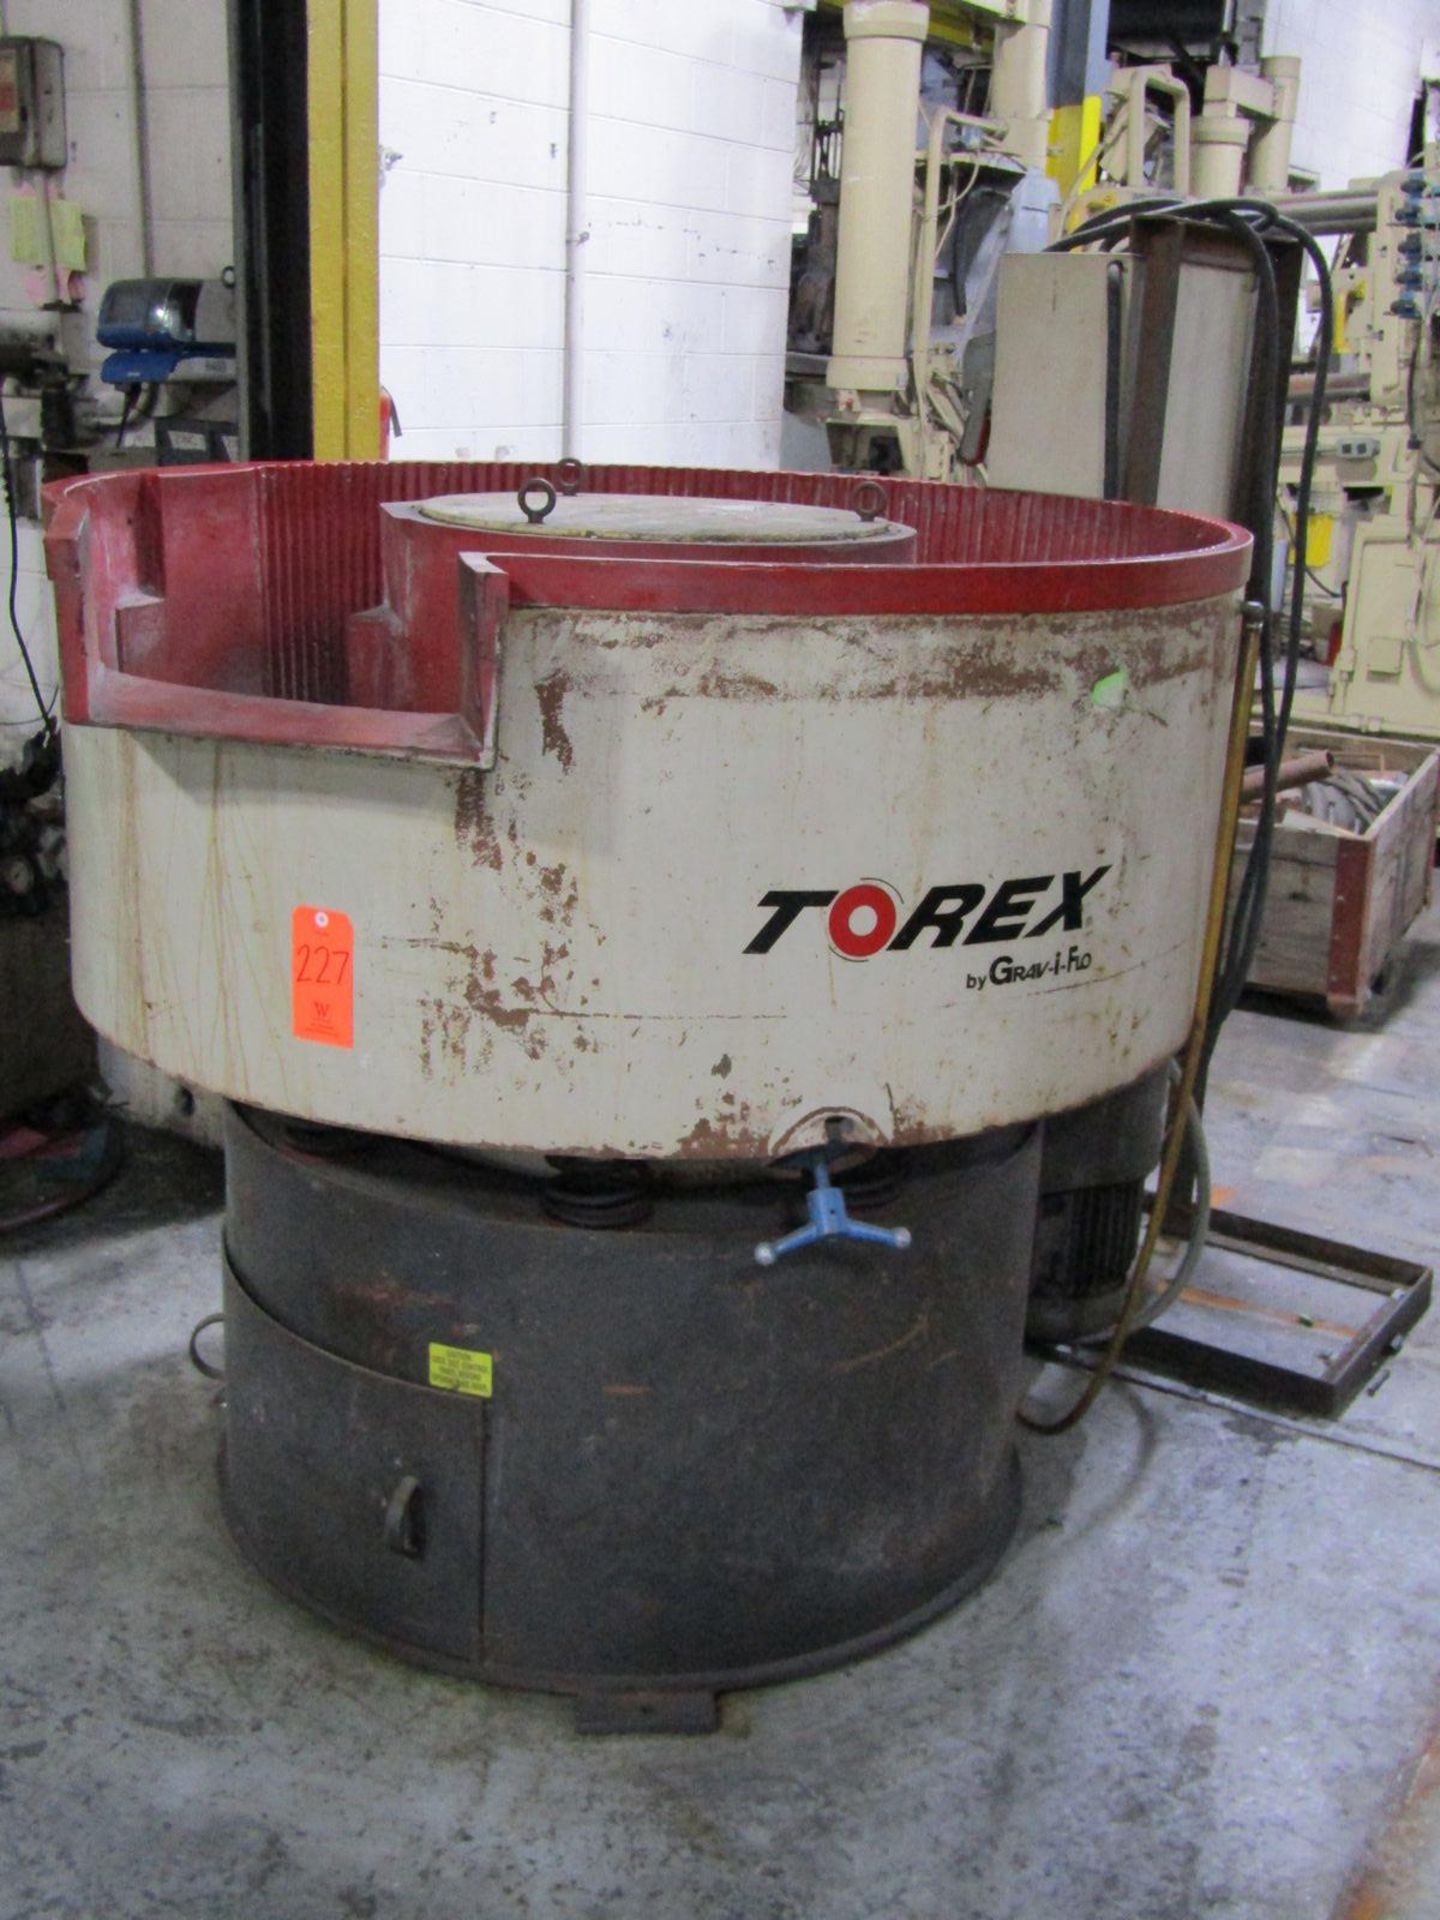 Graw-i-Flo Torex 56 in. Dia. (approx.) Model TG-2010 Vibratory Finisher, S/N: 928-0101